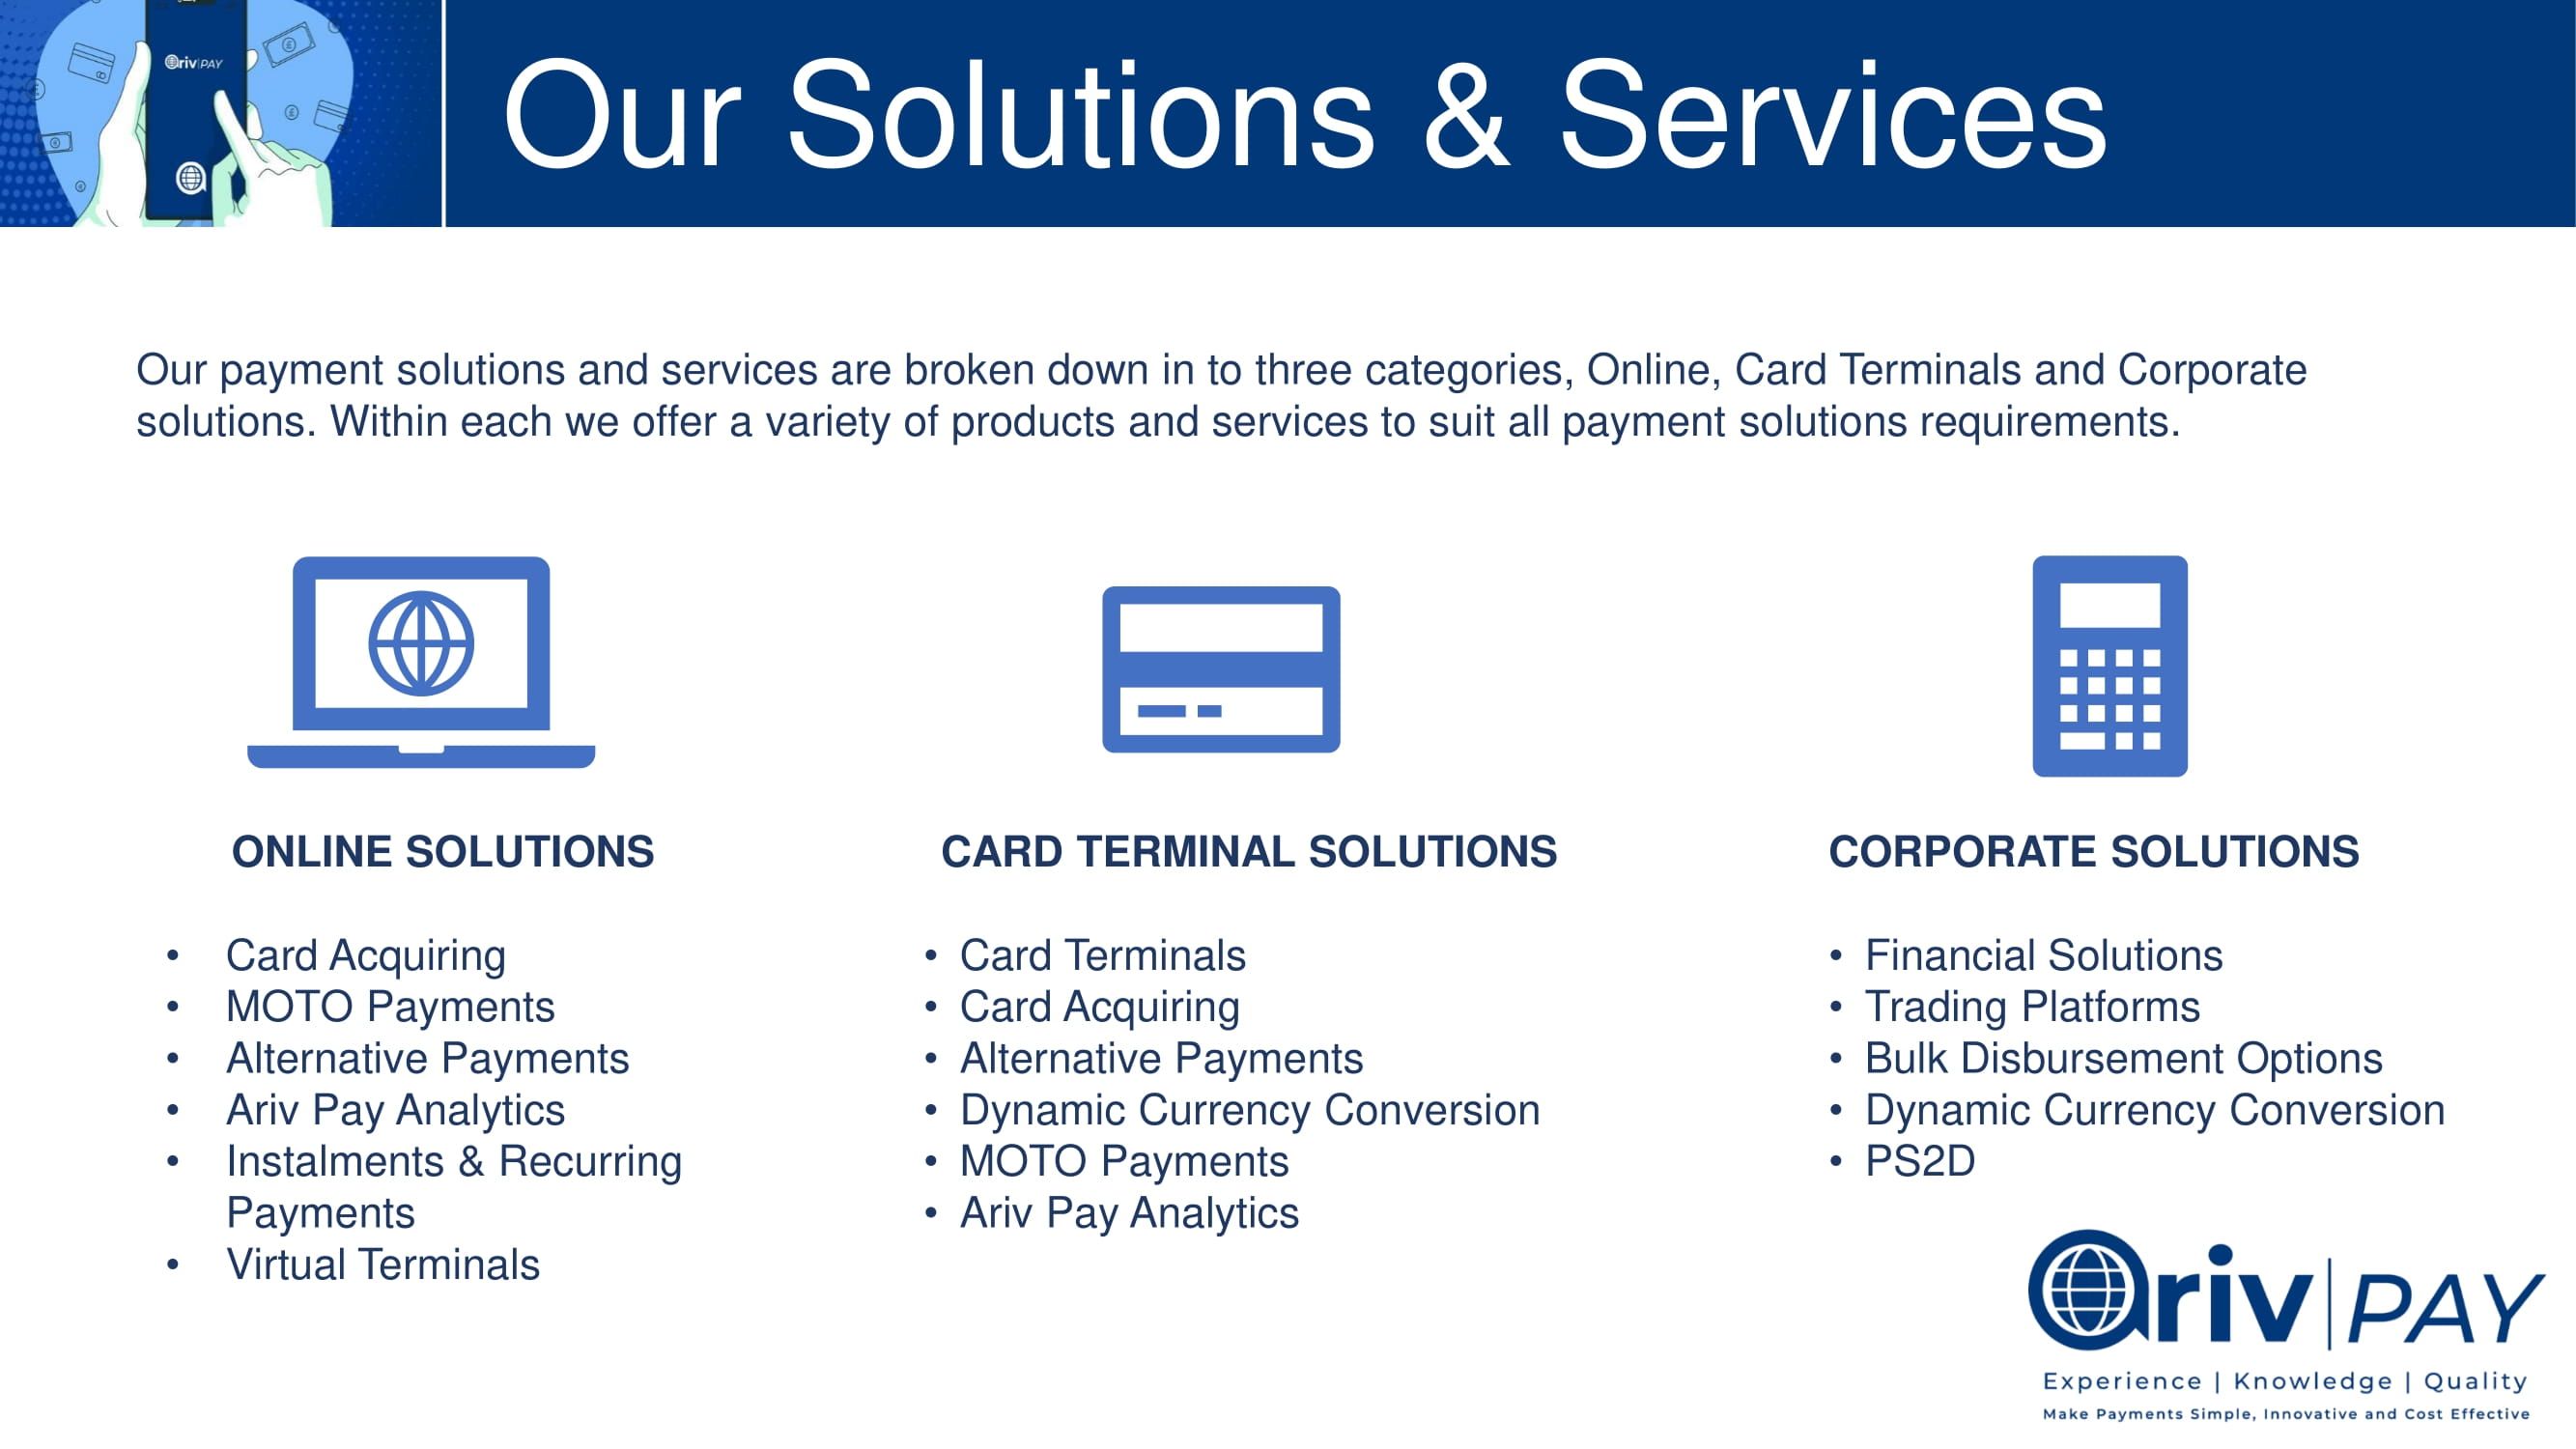 Our Solutions & Services